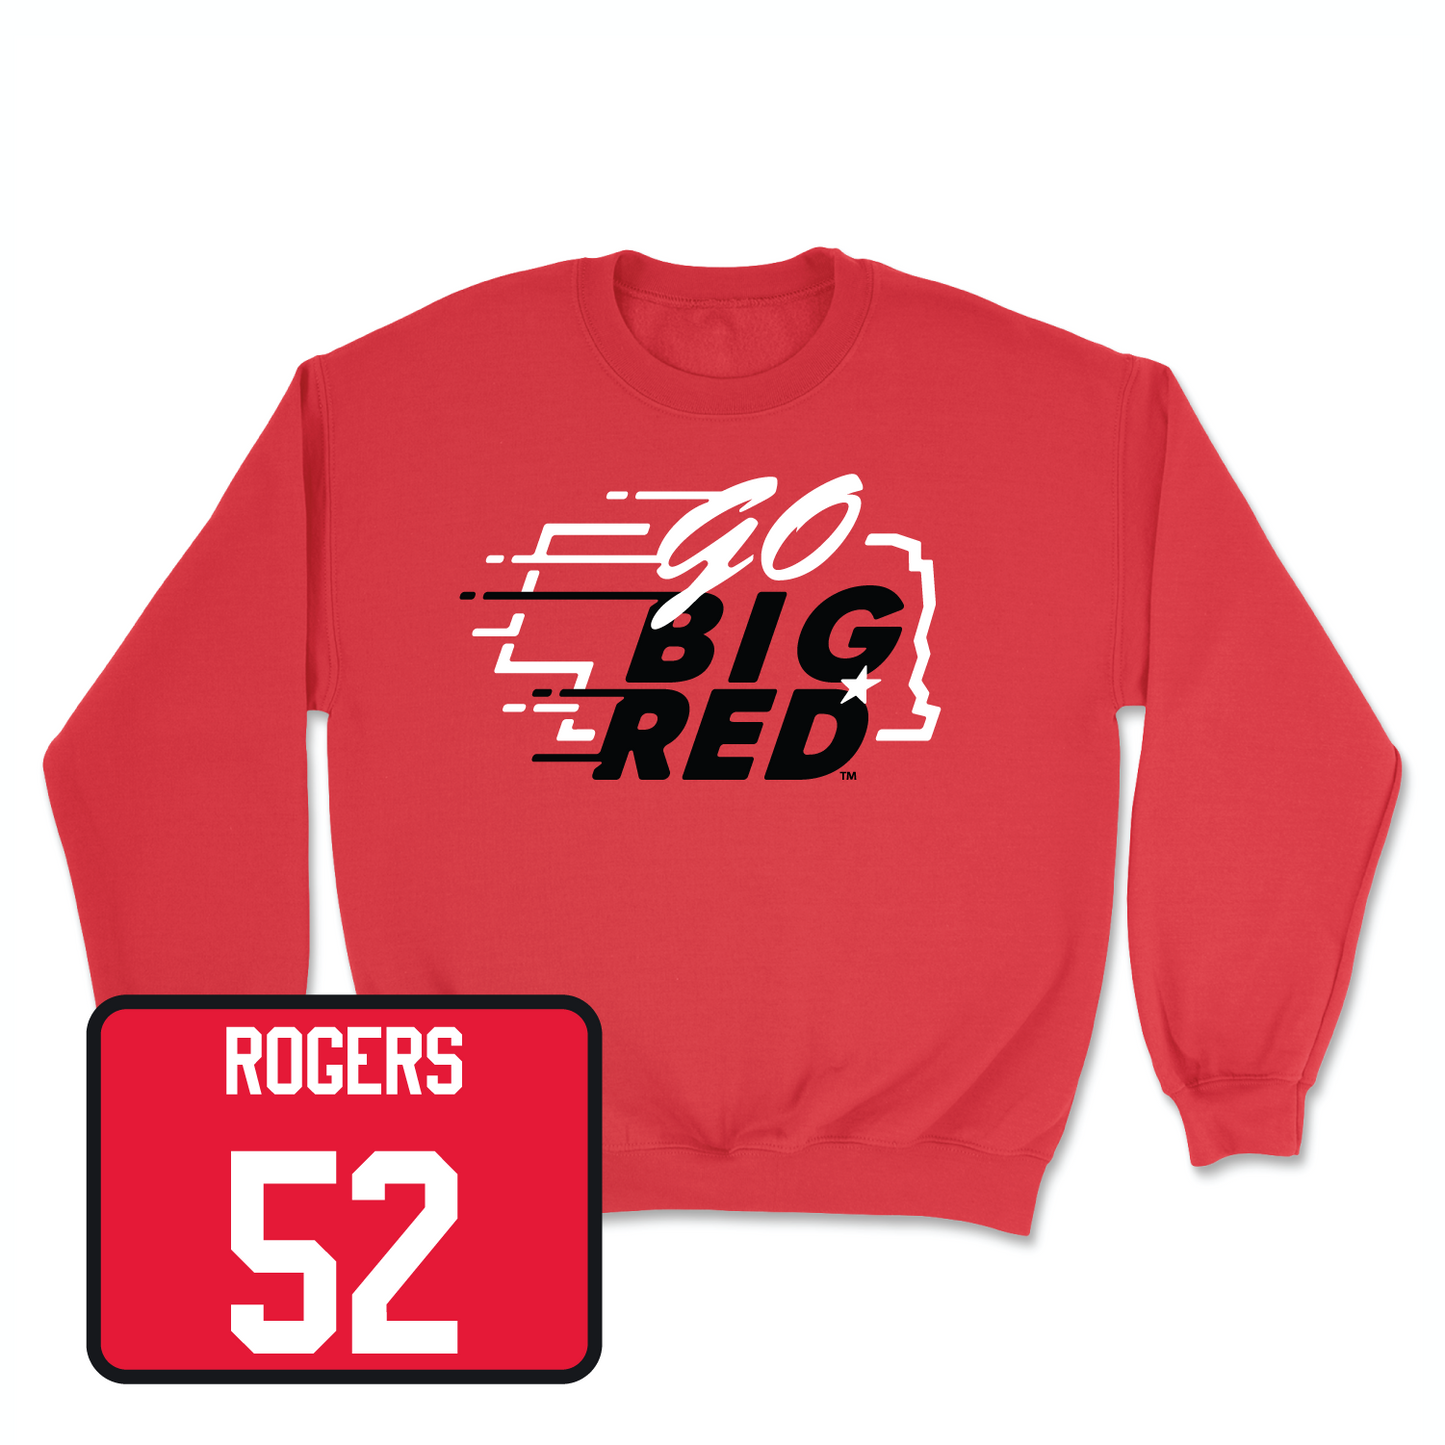 Red Football GBR Crew Youth Medium / Dylan Rogers | #52